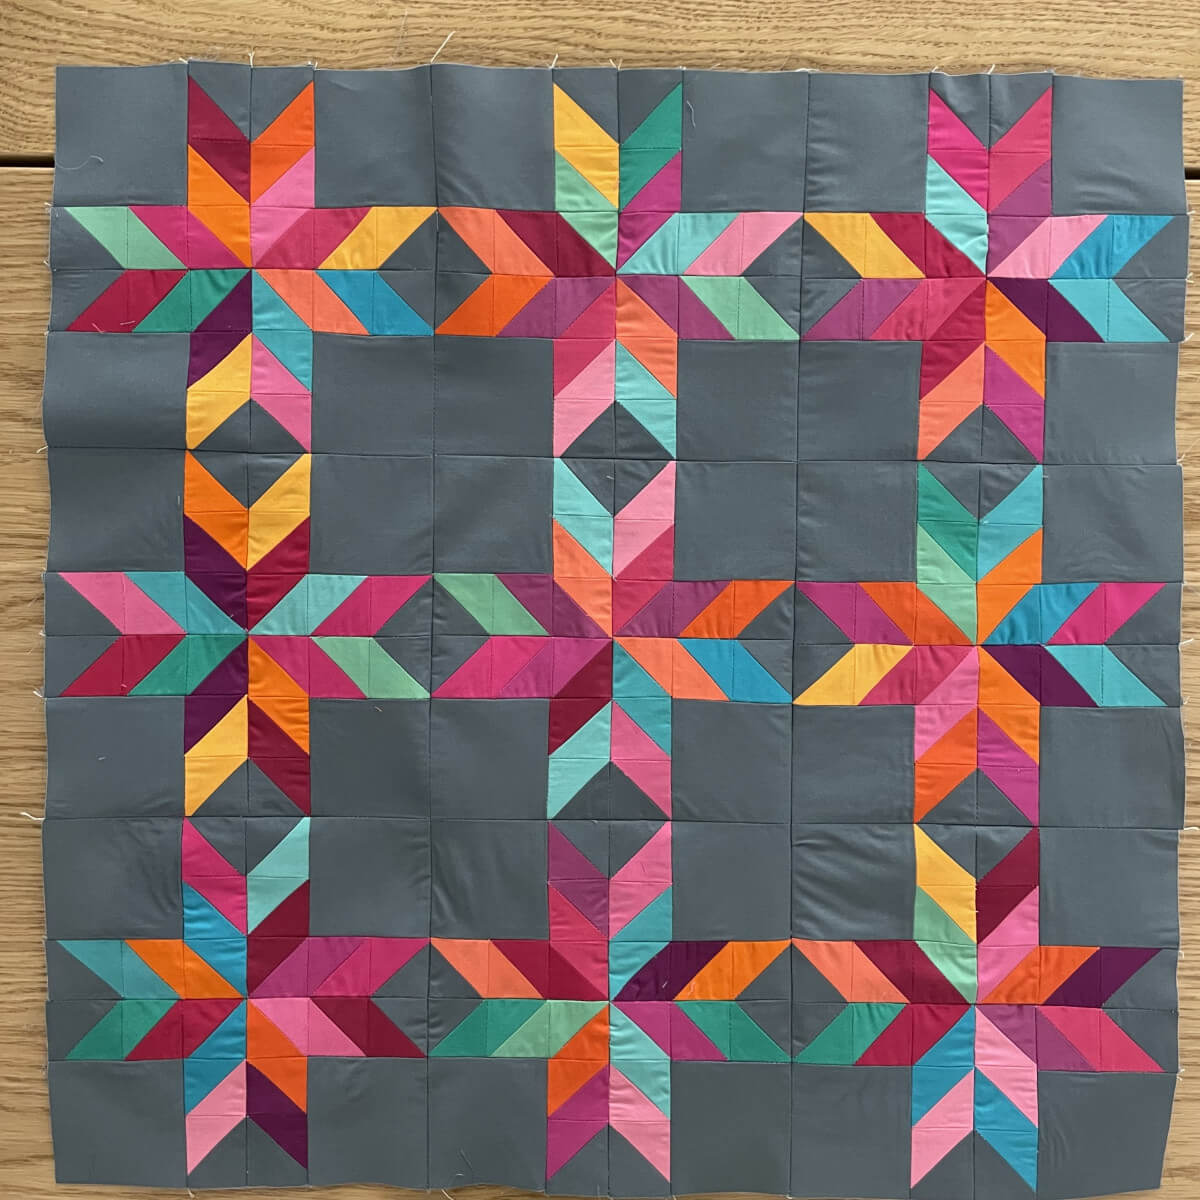 Silk Stars Quilt-along Week 5 - Let's put that quilt together now!